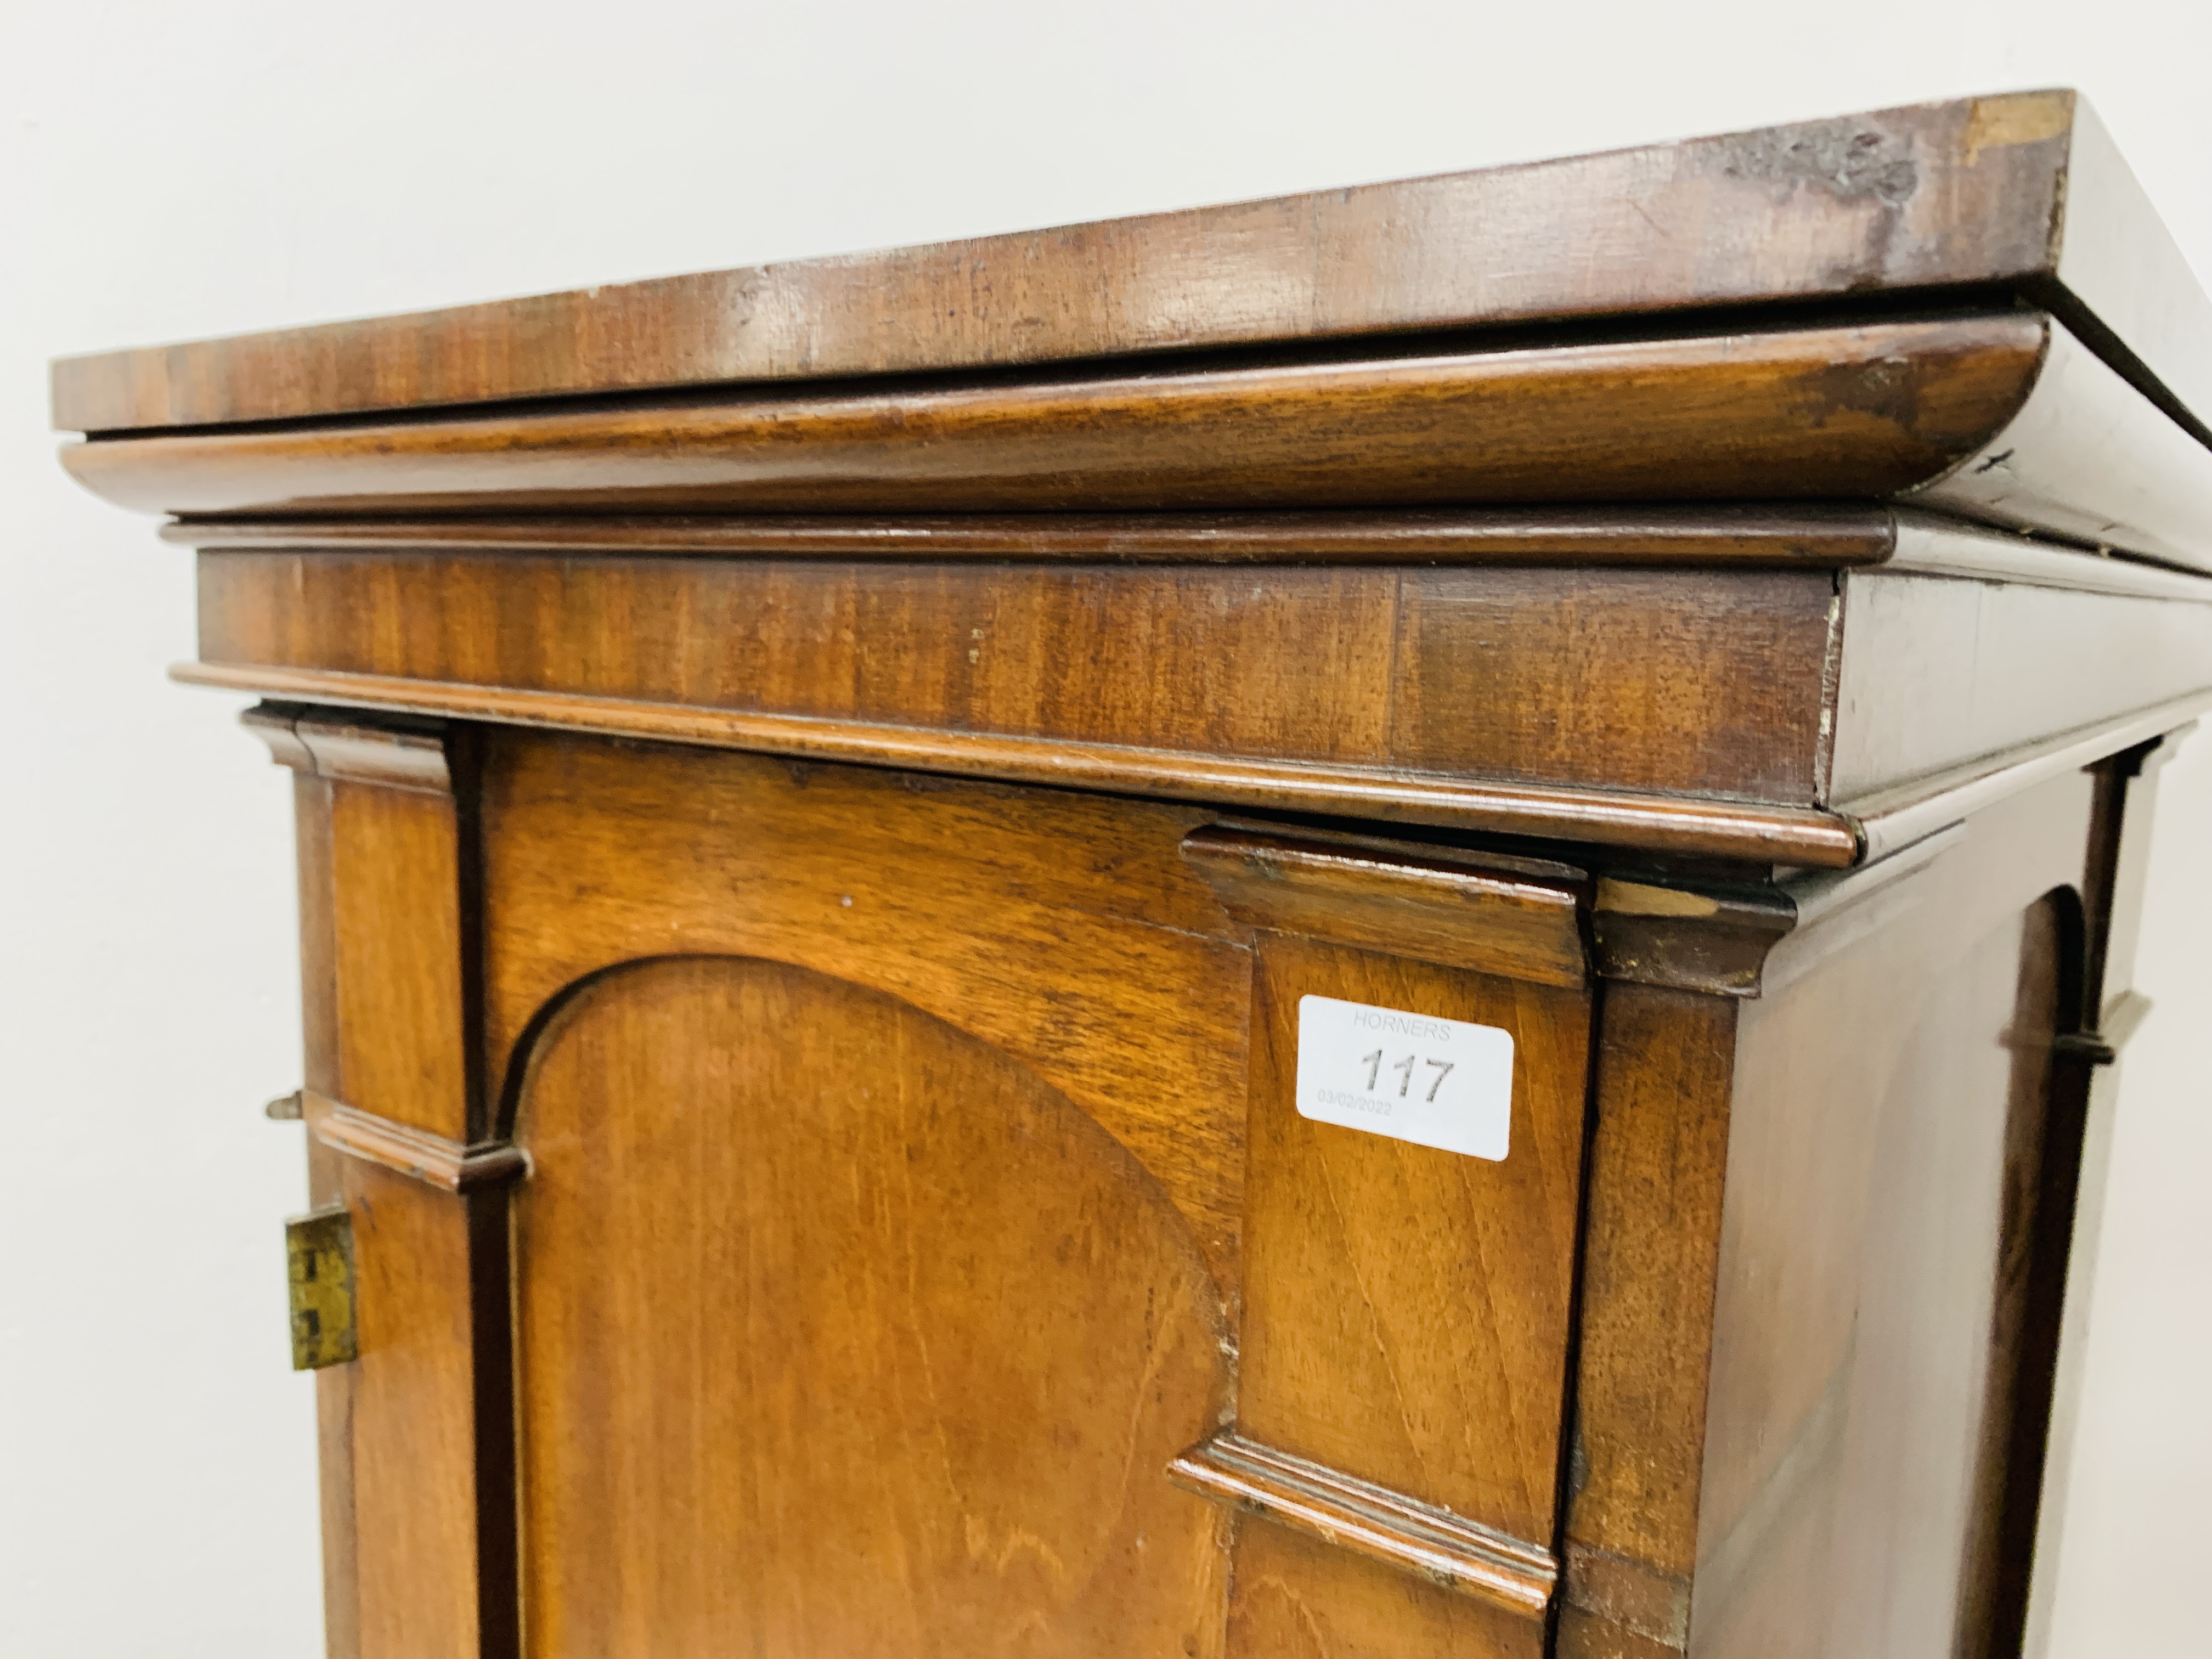 AN EARLY C19TH MAHOGANY SINGLE DOOR PEDESTAL (PART OF A LARGER PIECE) ENCLOSING SEVEN DRAWERS - Image 9 of 17